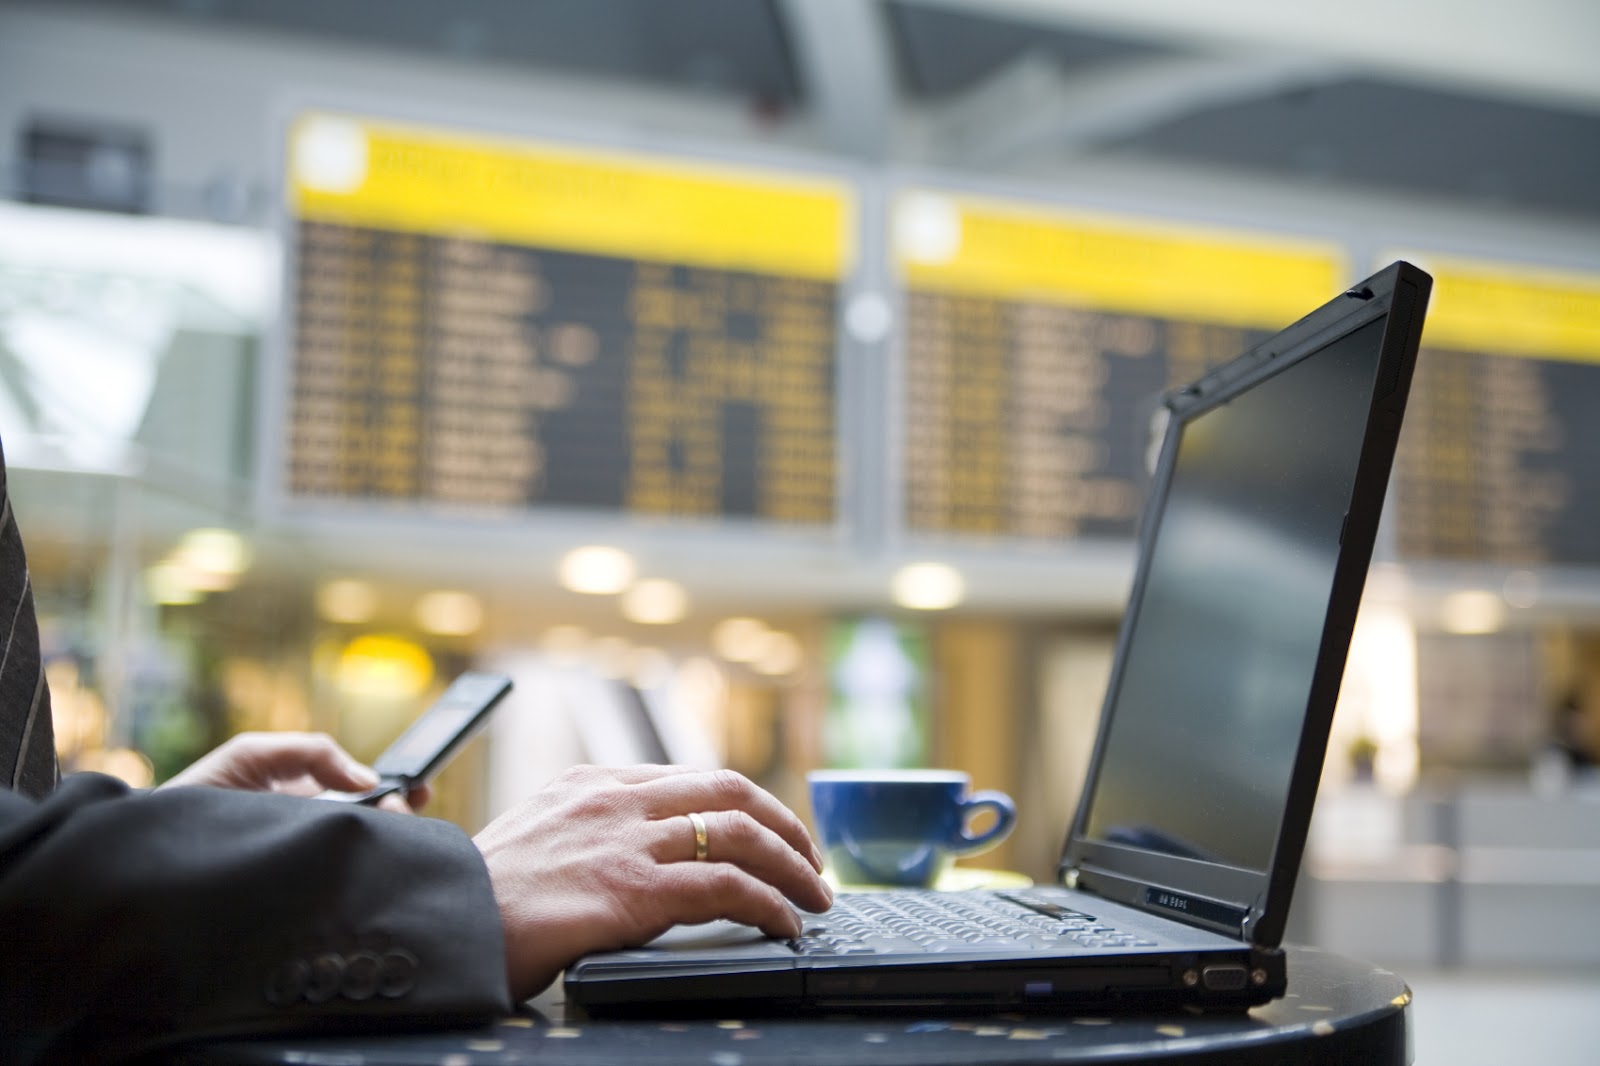 How safe is Wi-Fi connectivity for Air travellers